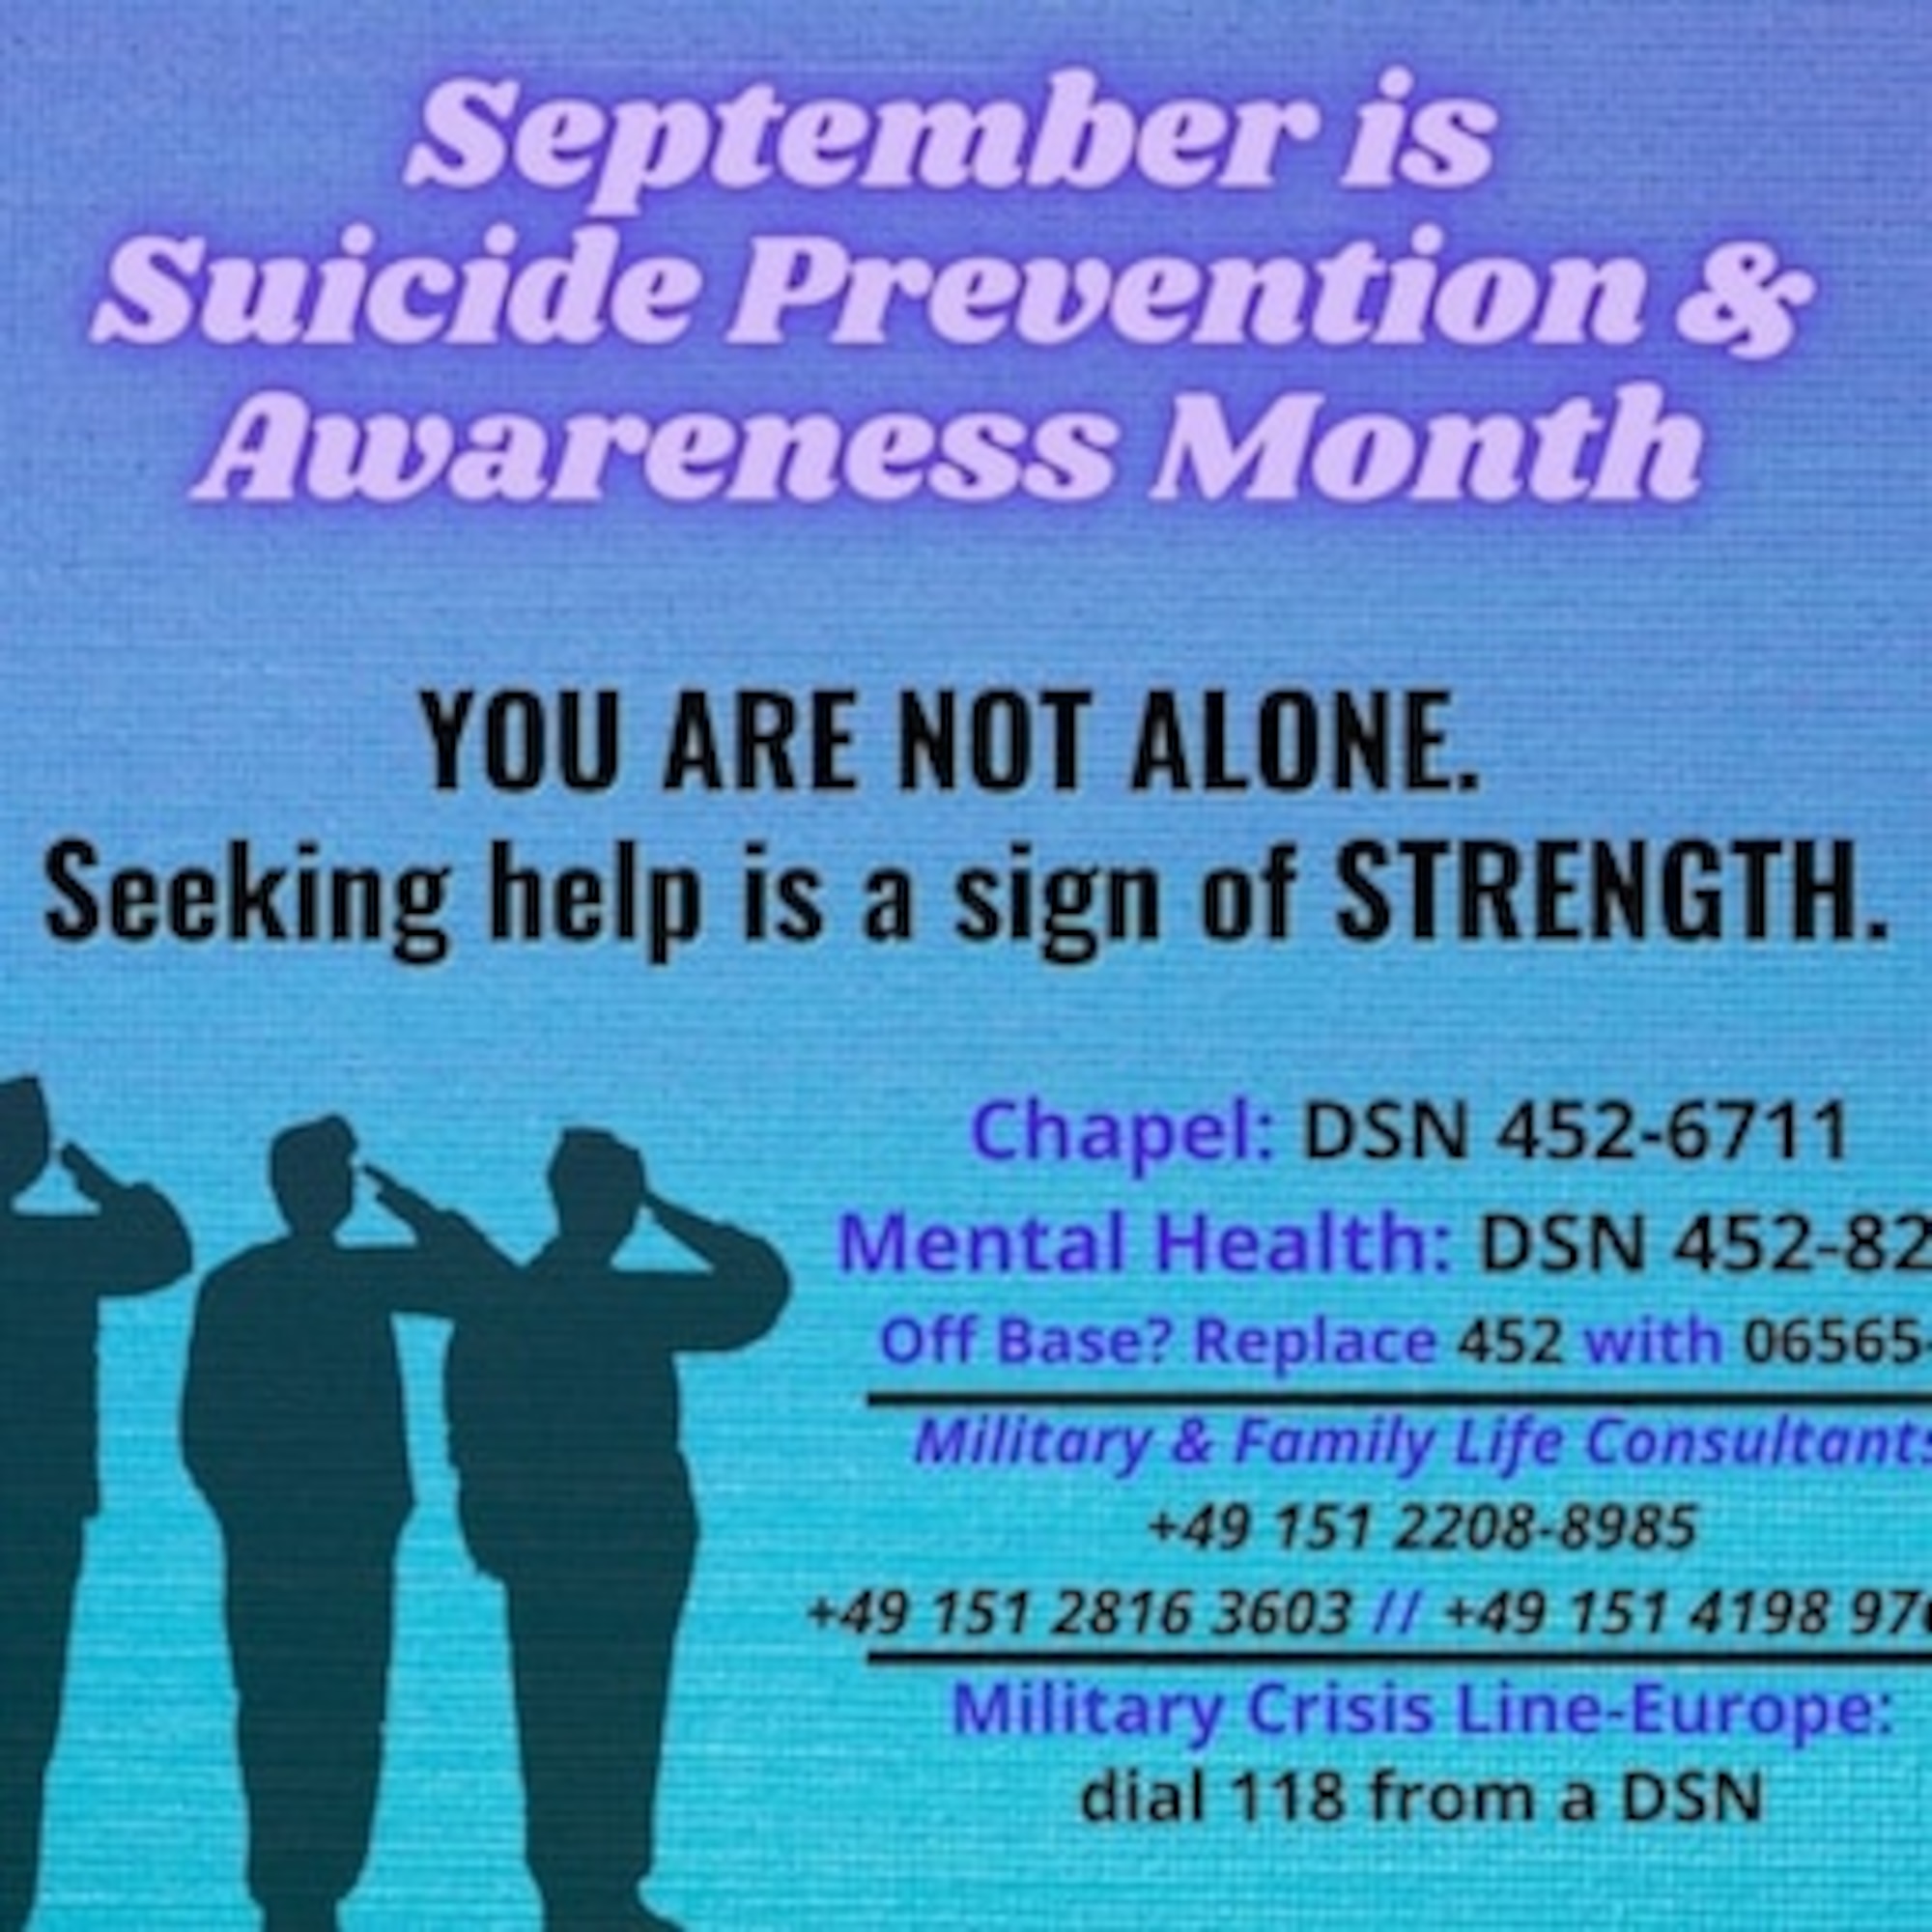 The graphic shows the available resources for those in need of mental, emotional and spiritual assistance.